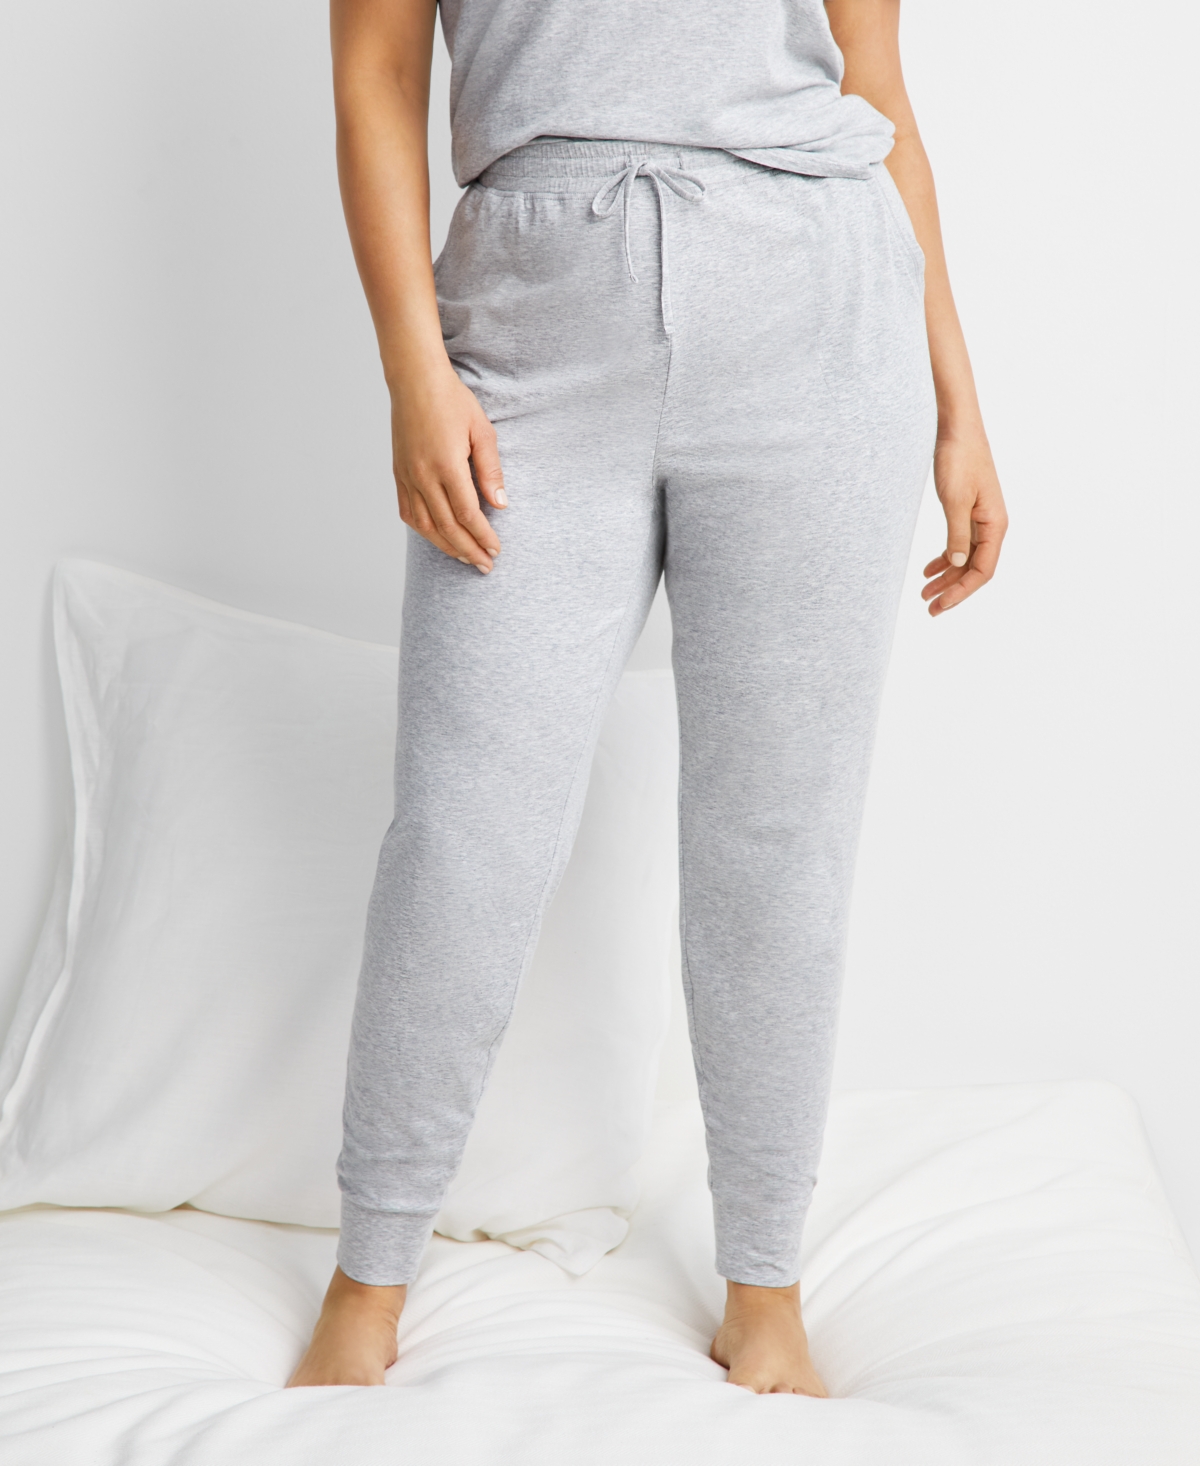 State Of Day Women's Jogger Pajama Pants Xs-3x, Created For Macy's In Sleep Grey Heather